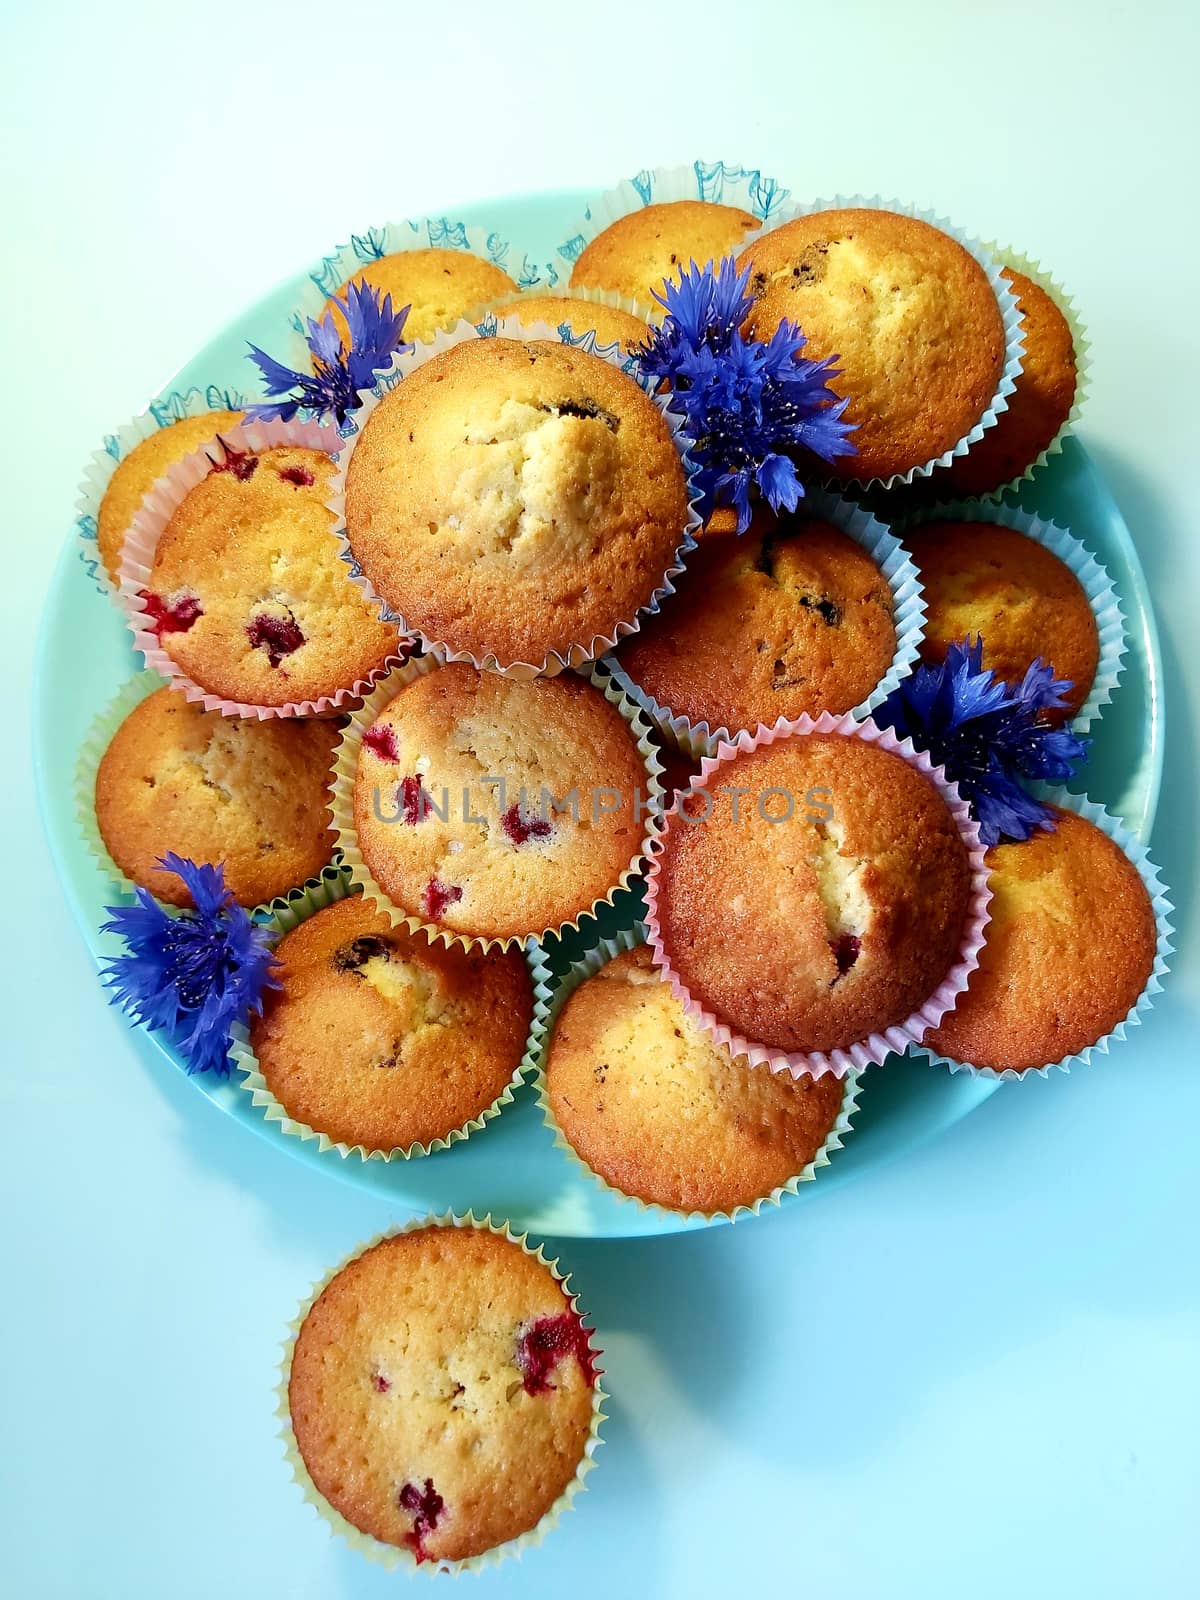 On a plate homemade cupcakes with flowers of meadow cornflowers